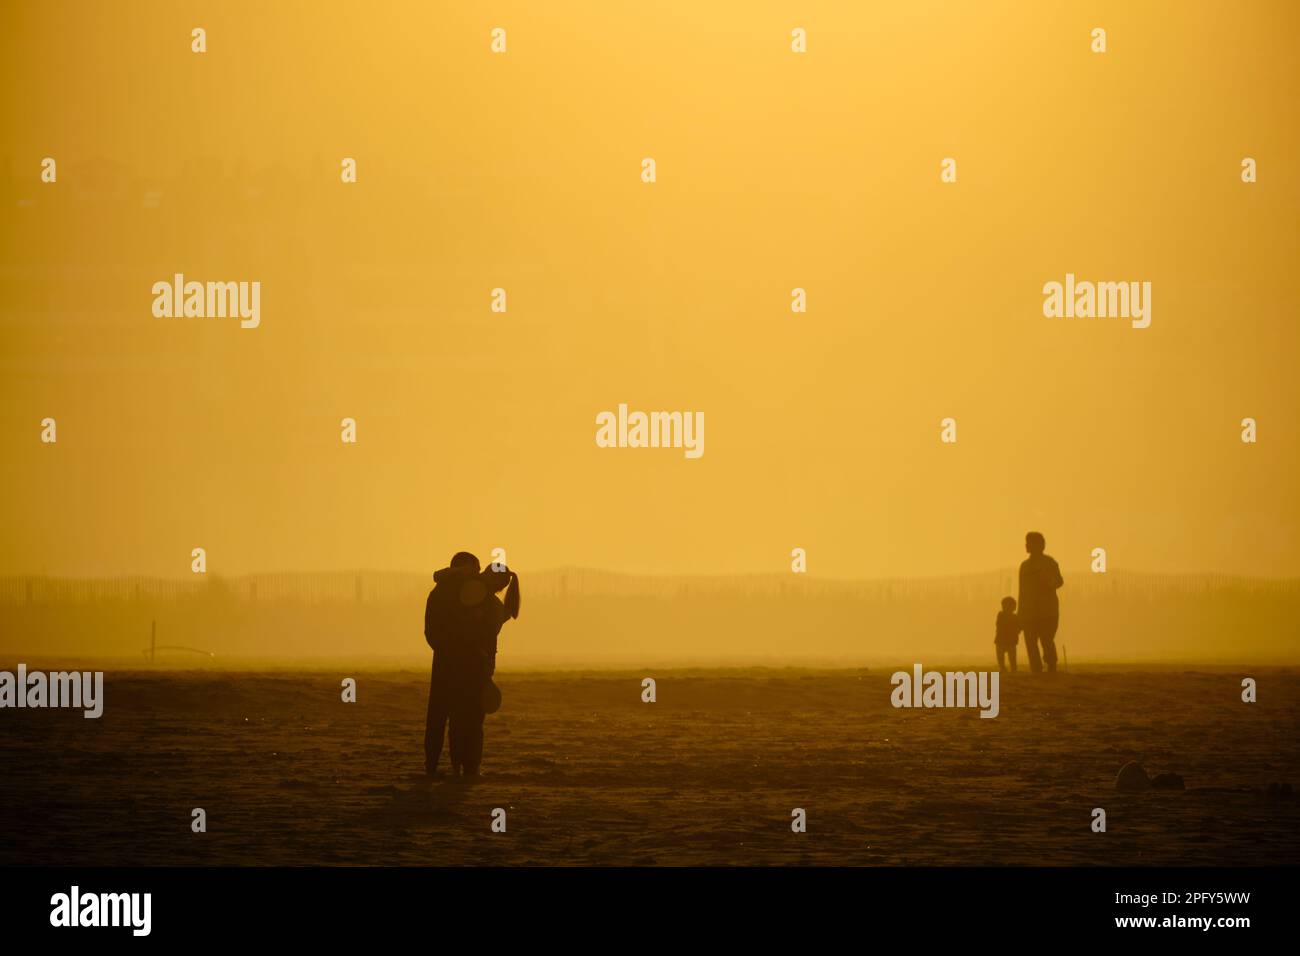 people walking along the beach during the golden hour, images golden by sunlight and silhouettes against the light Stock Photo